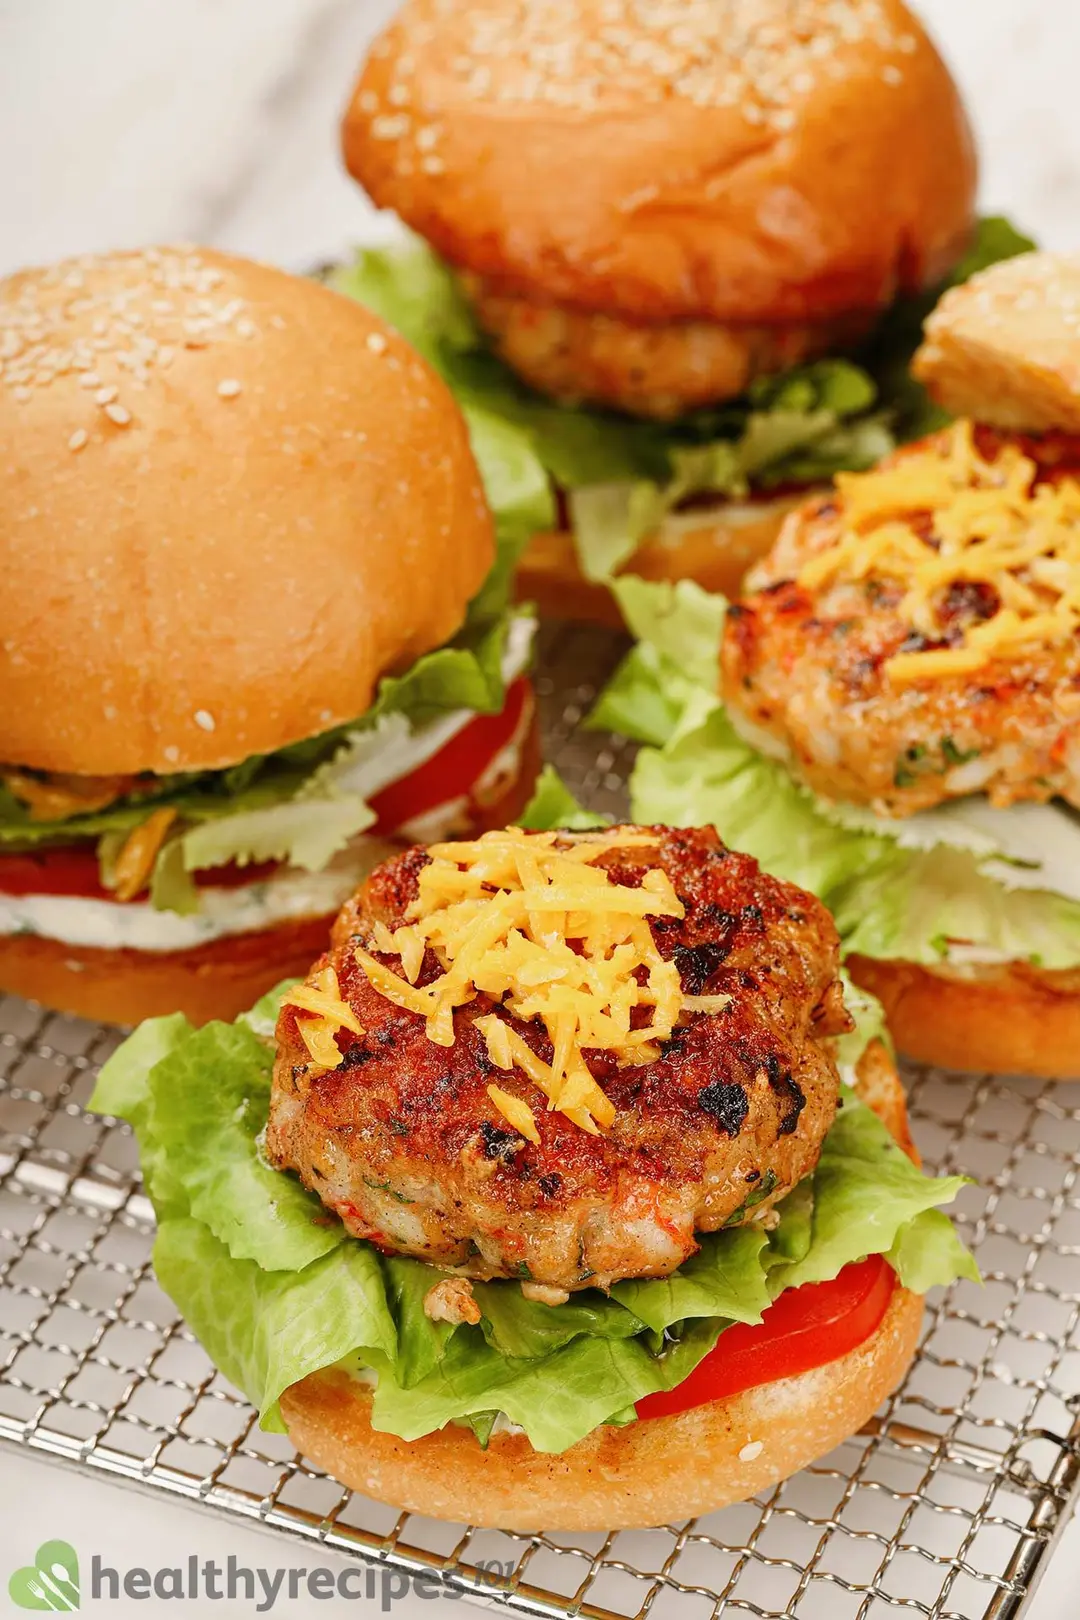 What to Put On a Shrimp Burger